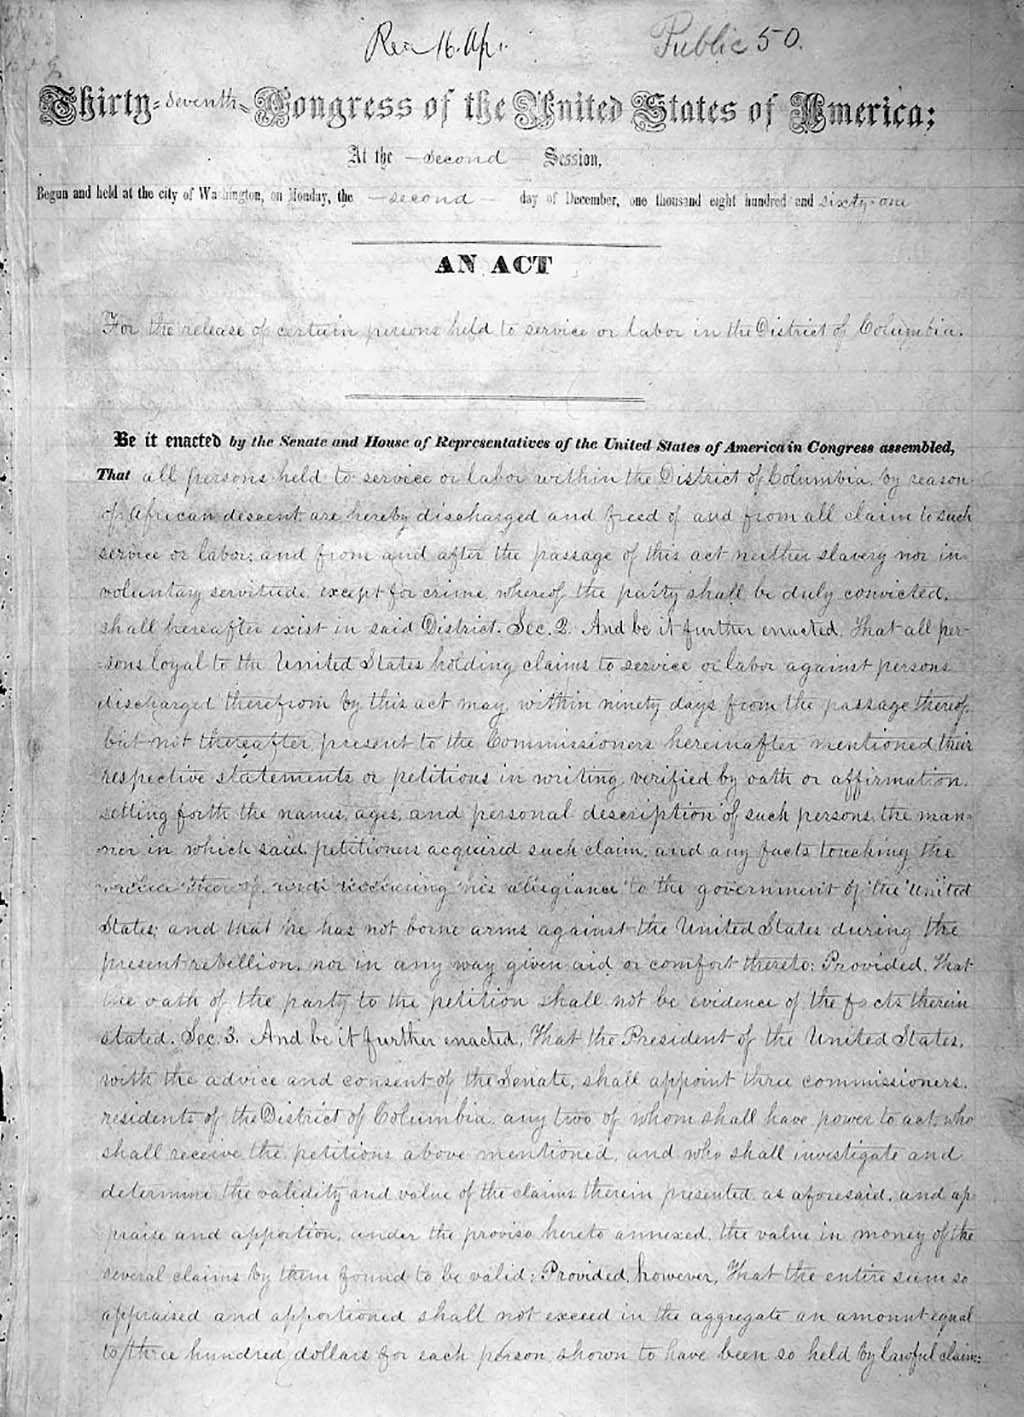 District of Columbia Emancipation Act